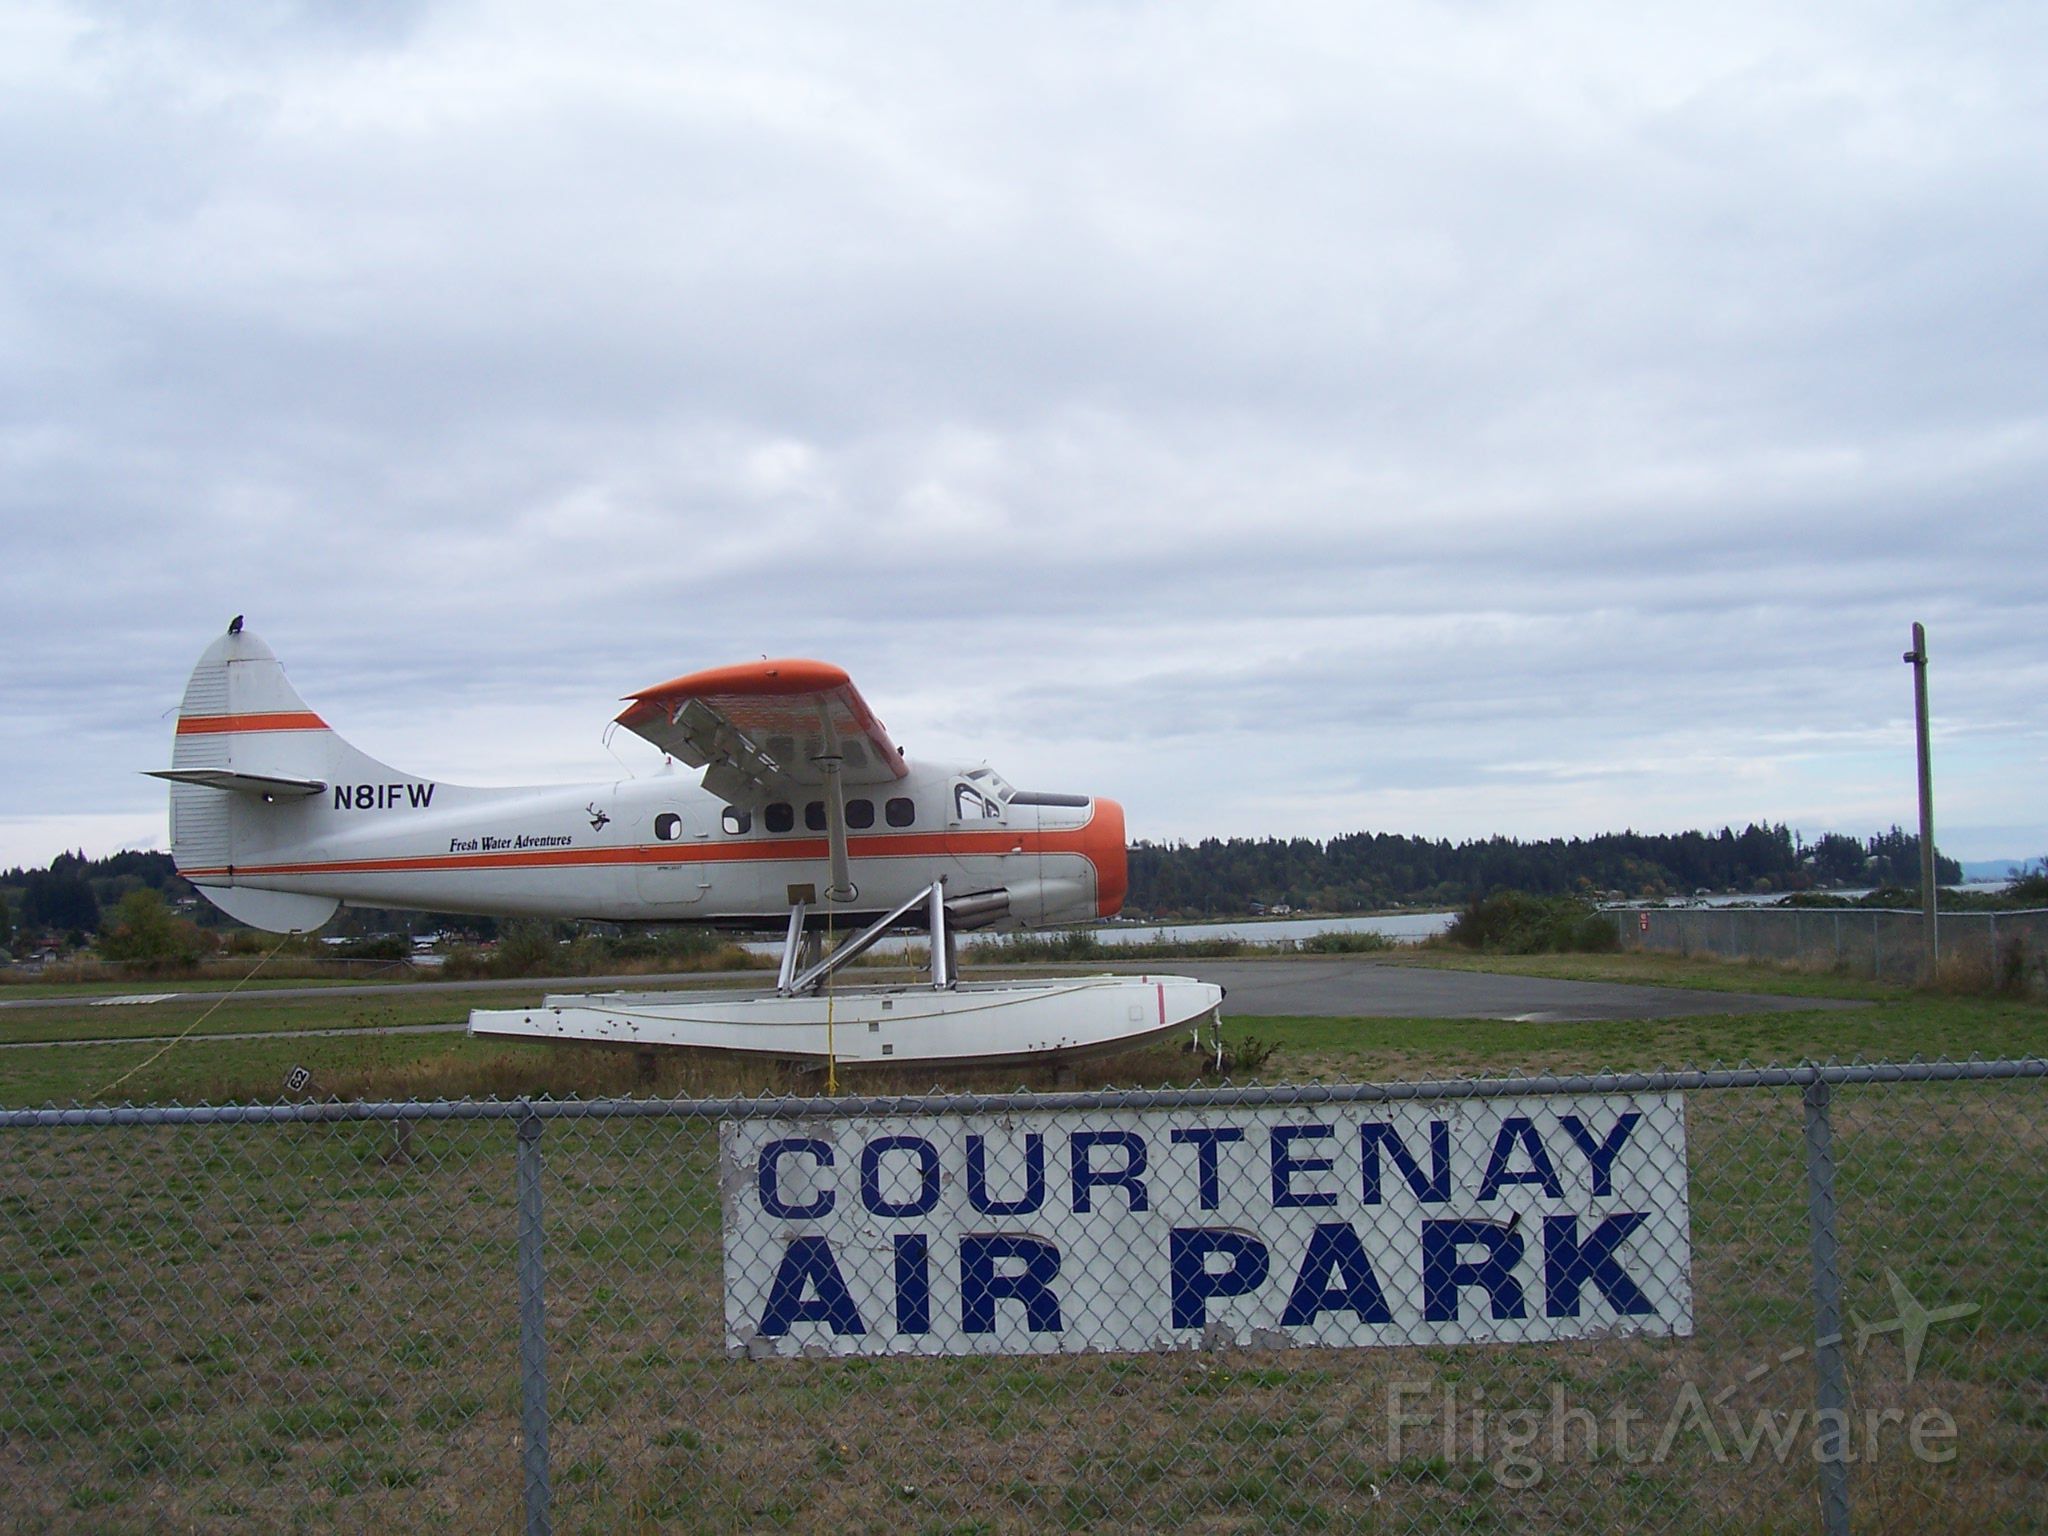 Piper Aerostar (N81FW) - Courtenay Airpark - our local airfield on the estuary between Comox & Courtenay, BC